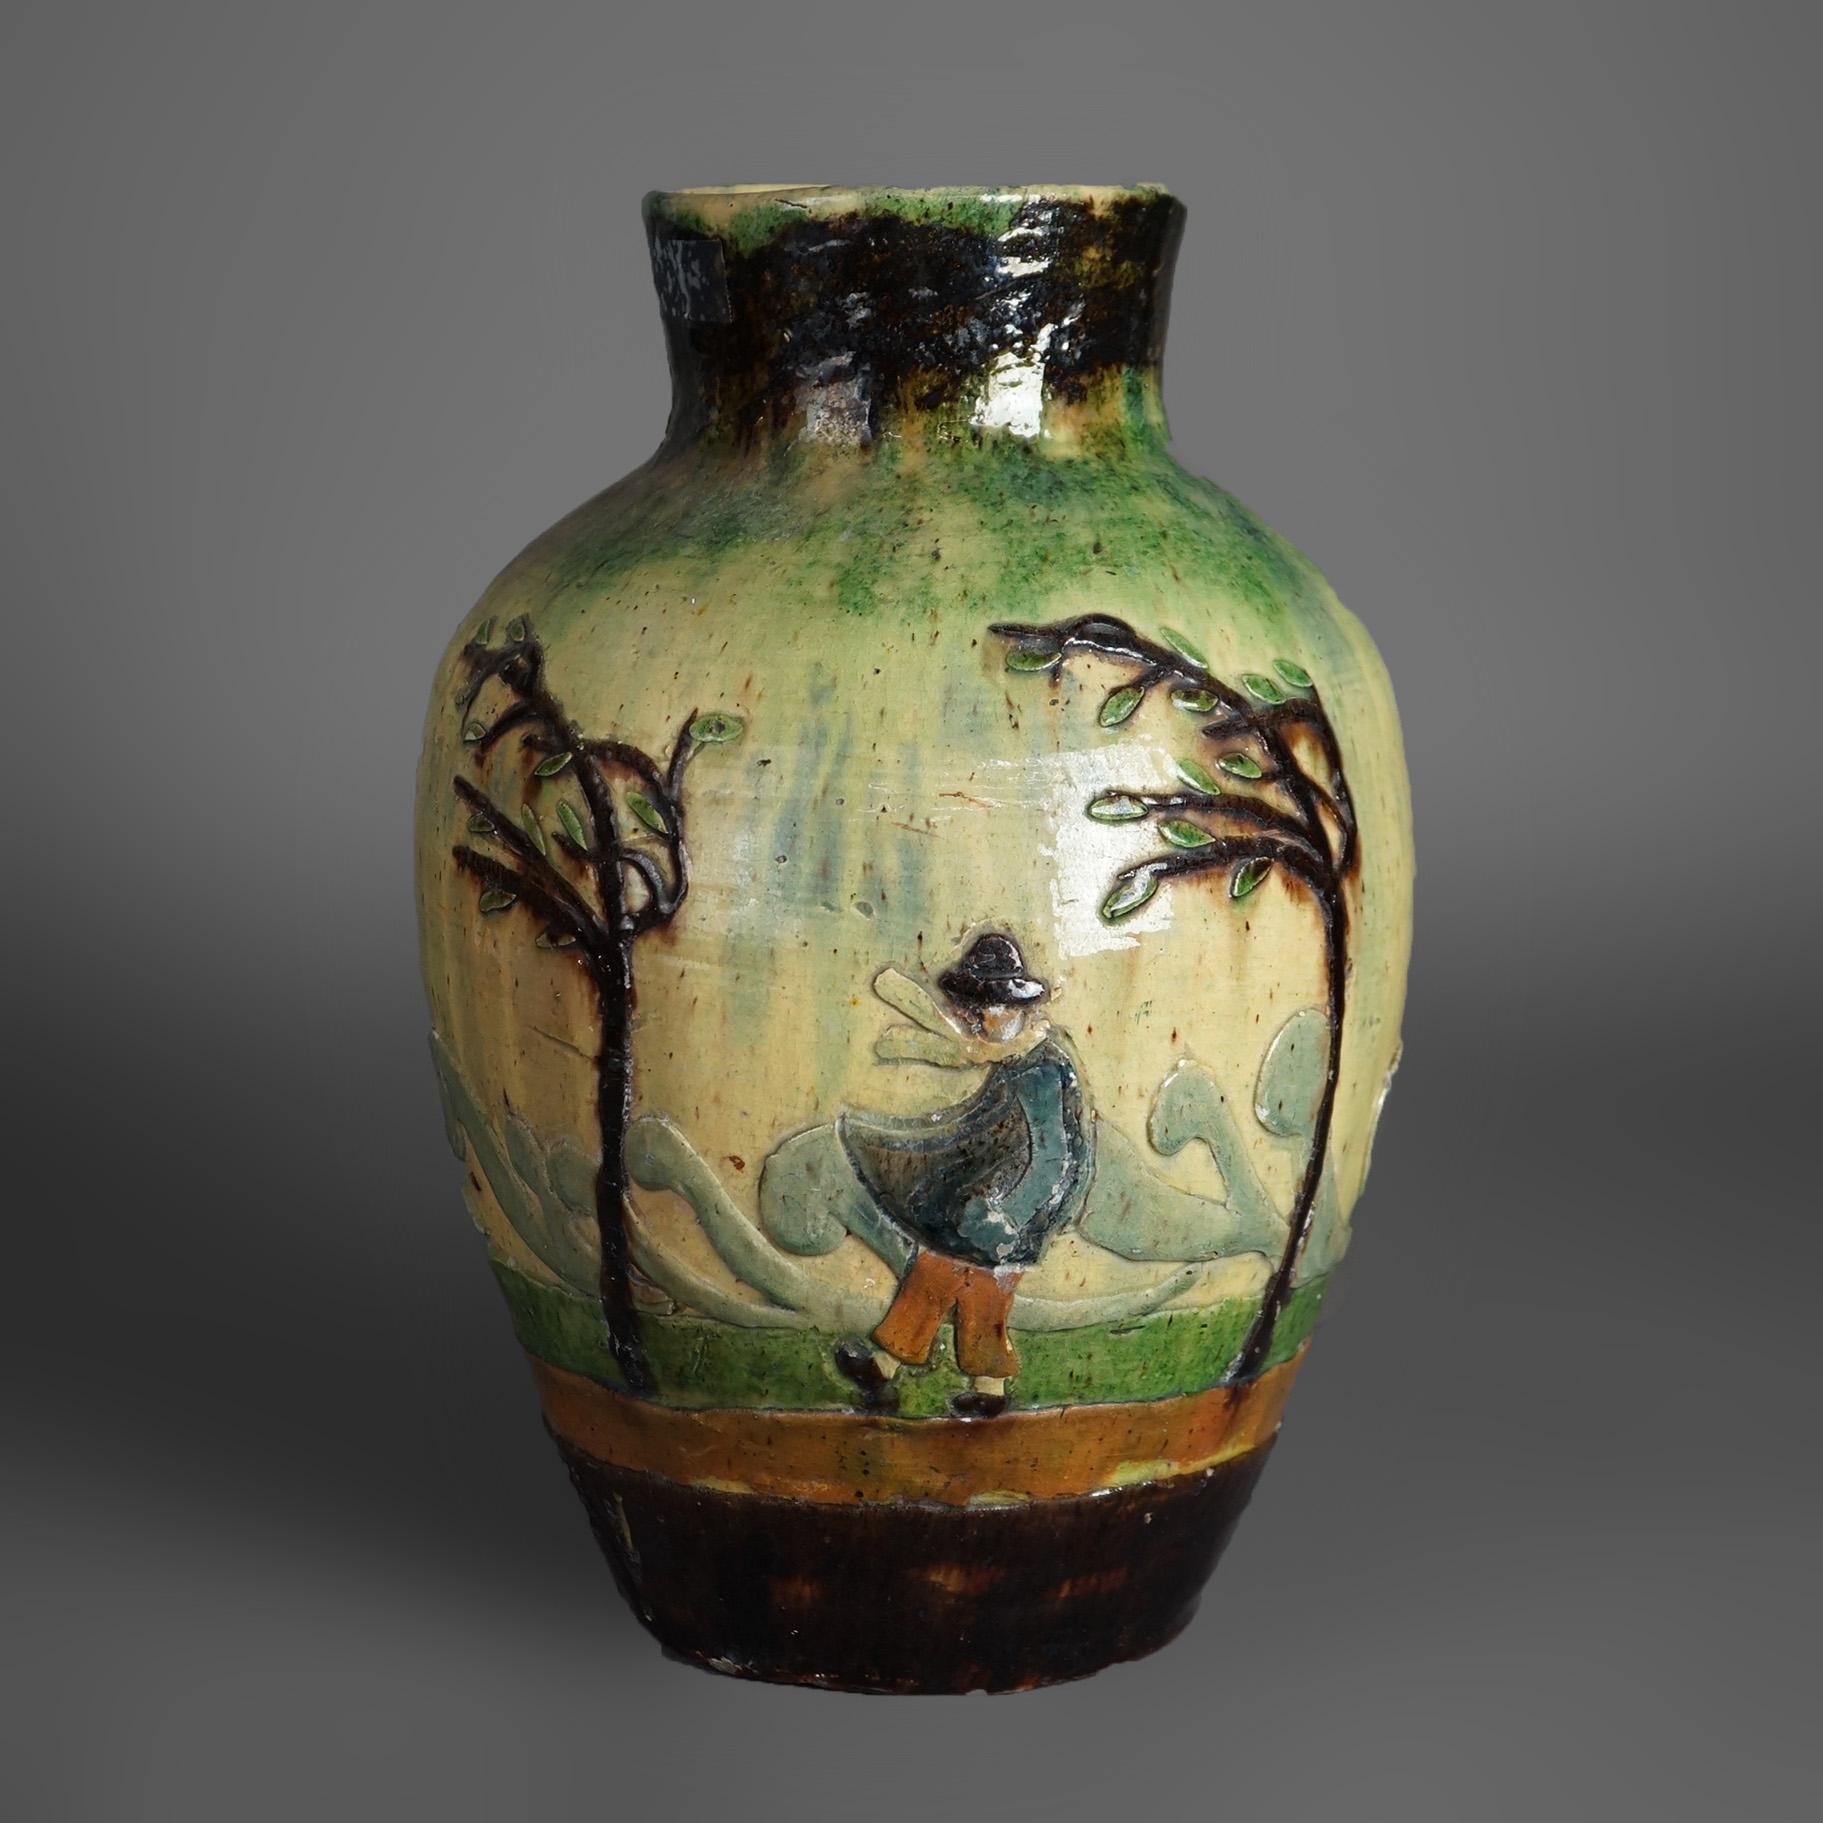 An antique French Barbotine vase offers pottery construction with outdoor scene with windswept trees and figures, c1890

Measures - 14.25